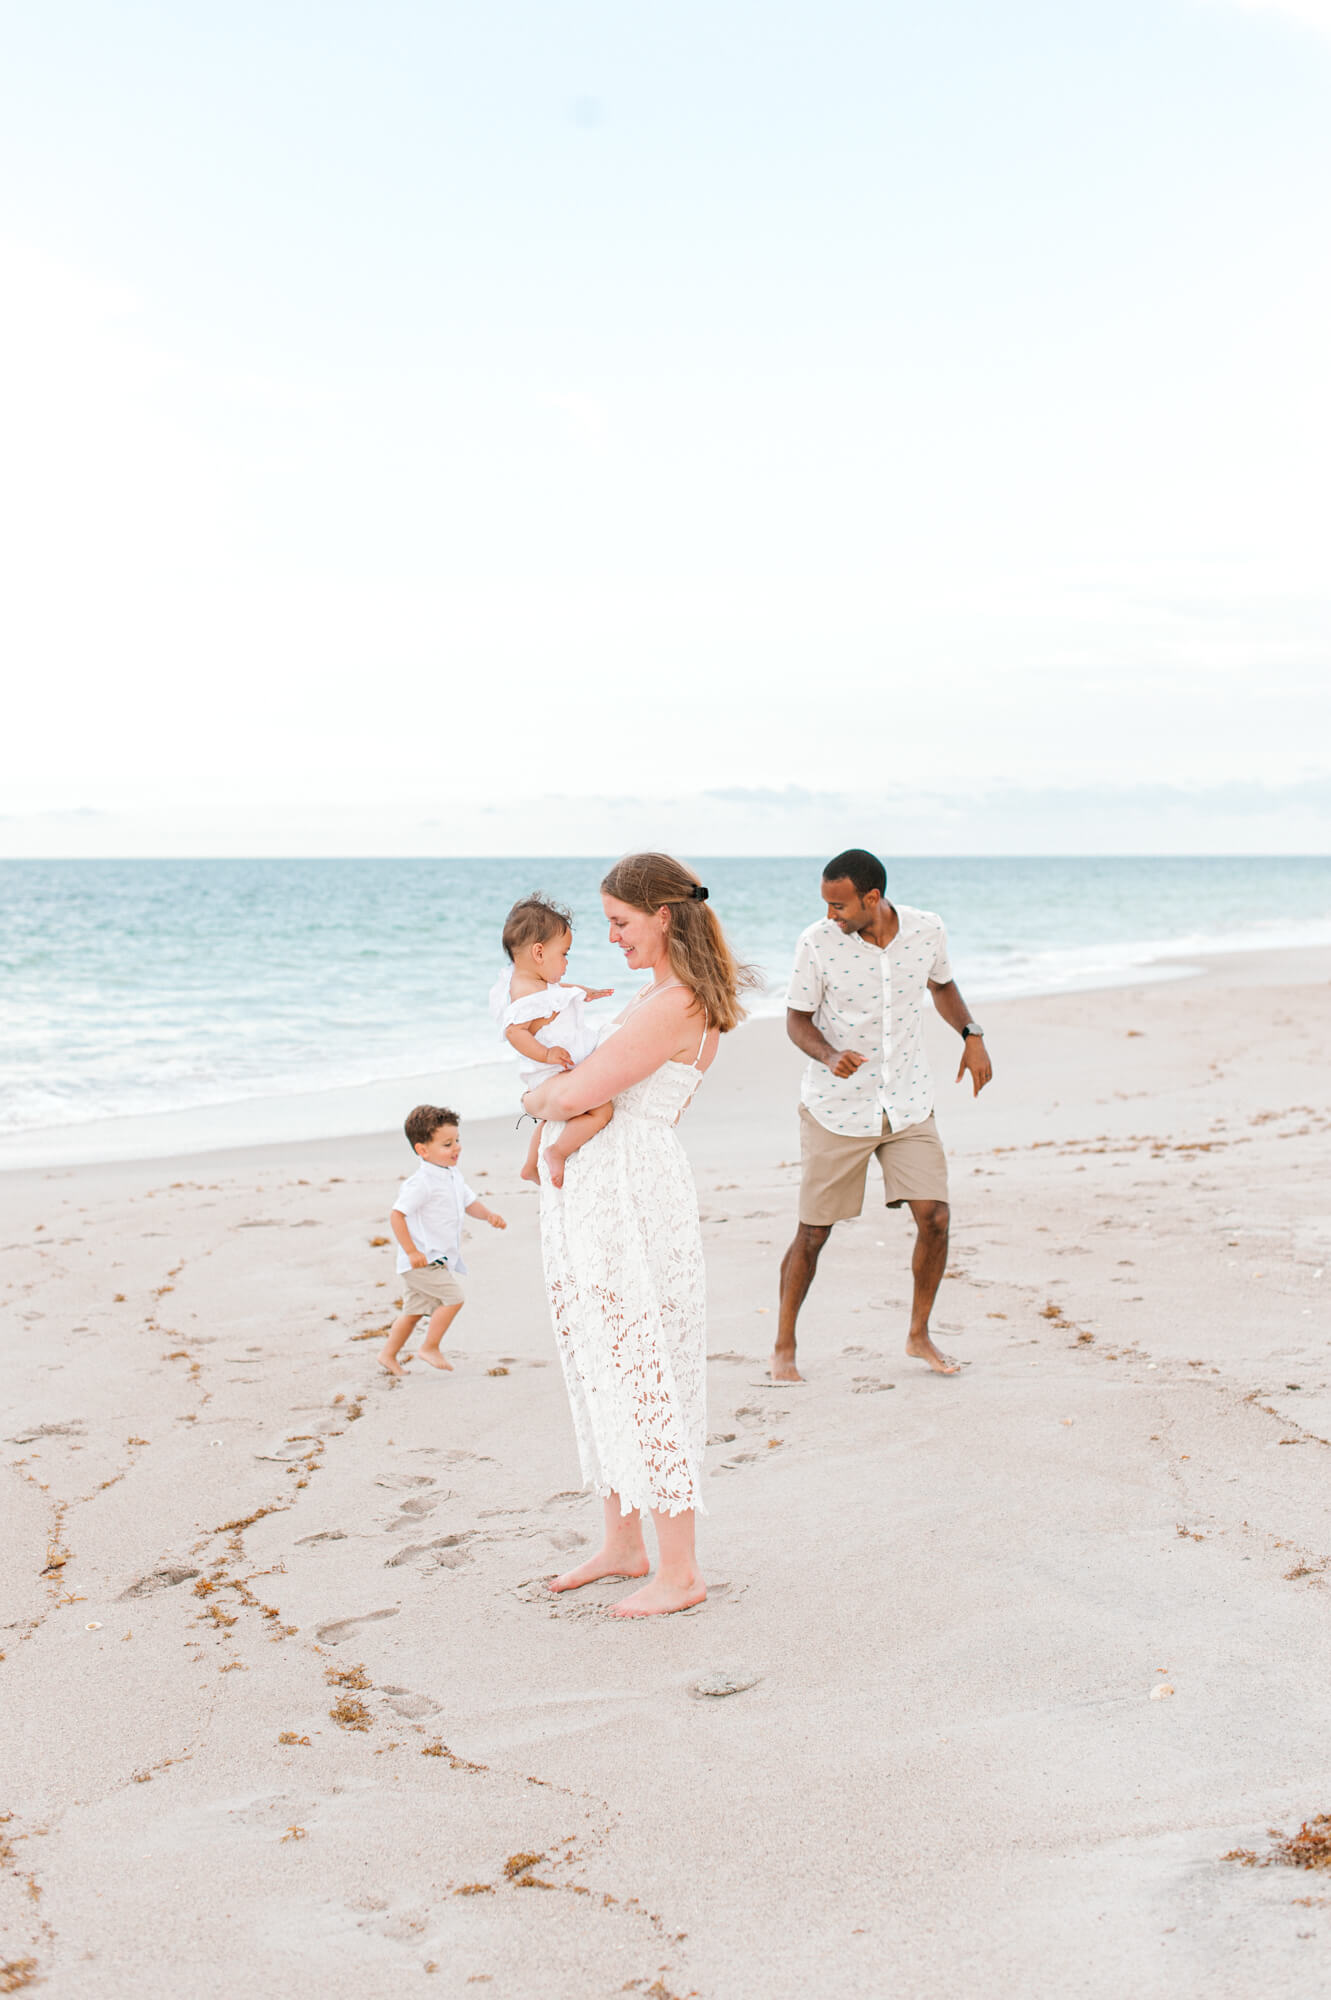 Family of four playing on the beach during their session at sunset, stroller rentals in Orlando would be perfect for them.